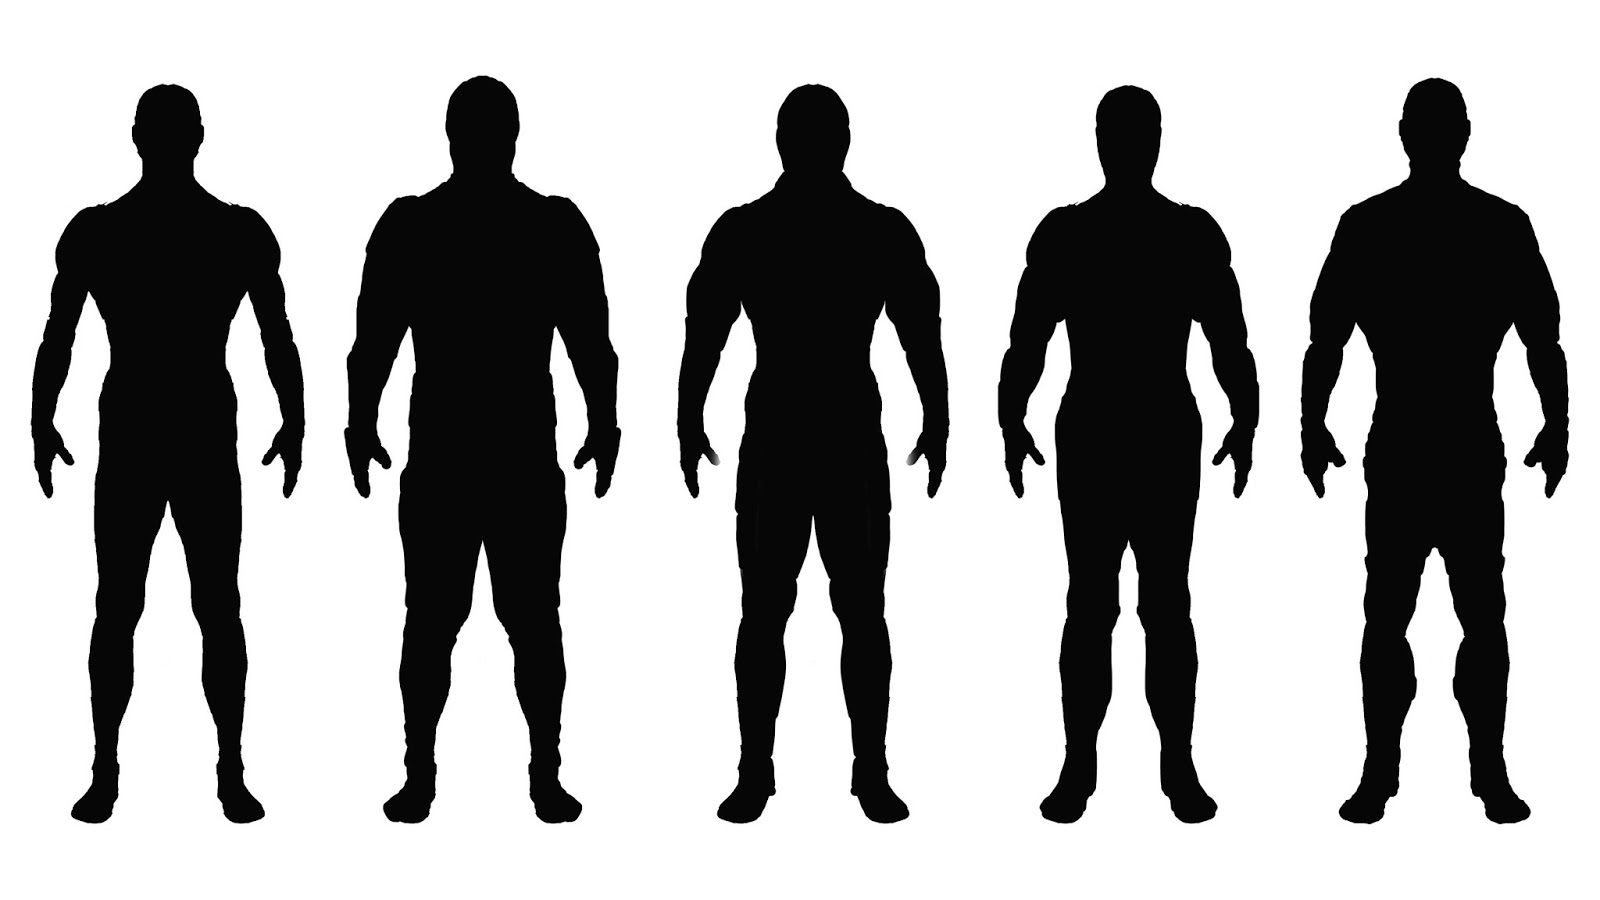 Sean's CG Arts & Animation Blog: Body Structure - Silhouette to ...